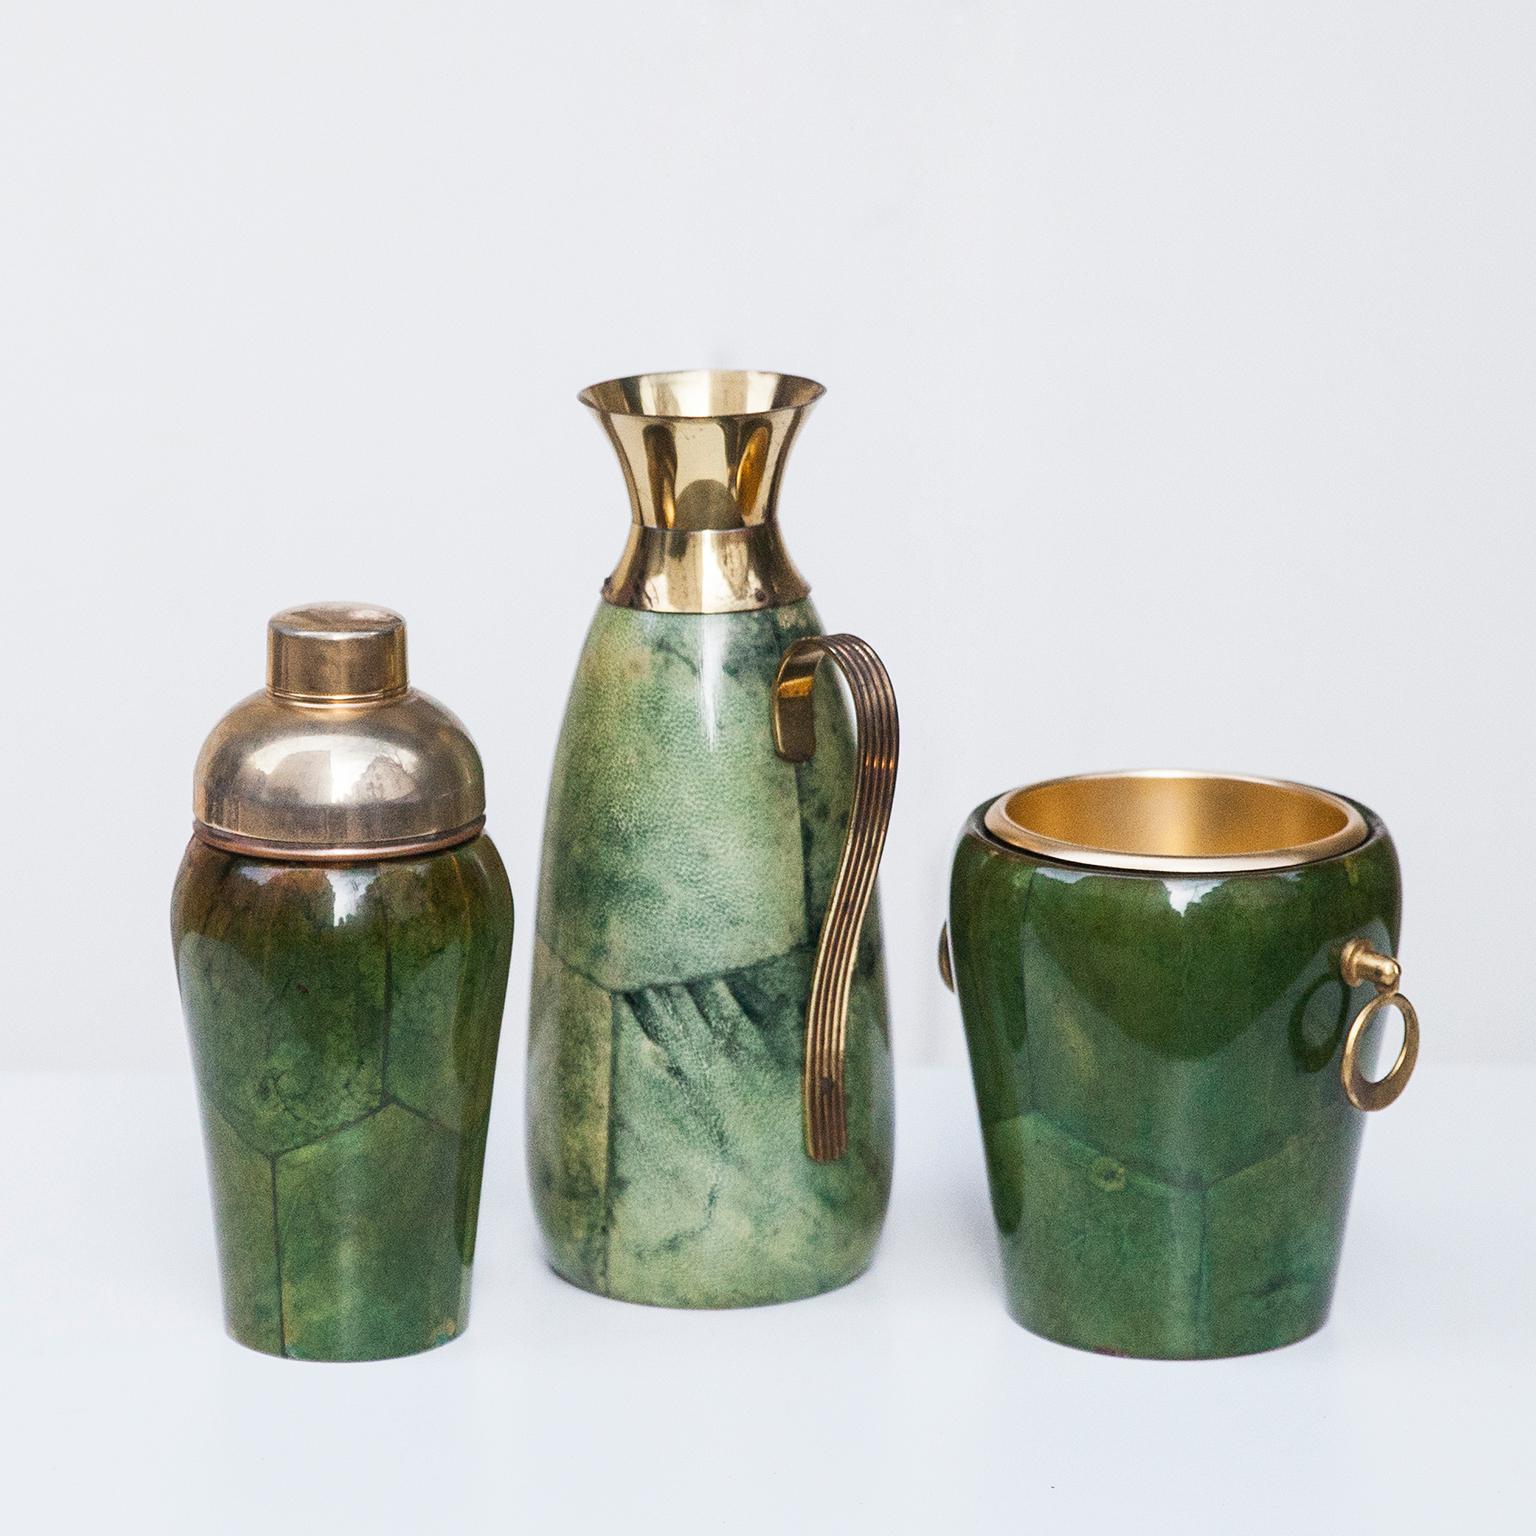 Wonderful cocktail set by Aldo Tura in green, grey parchment, ice bucket, carafe and Shaker.

 Along with artists like Piero Fornasetti and Carlo Bugatti, Aldo Tura (1909-1963) definitely belonged to the mavericks of Italian design. Where as the